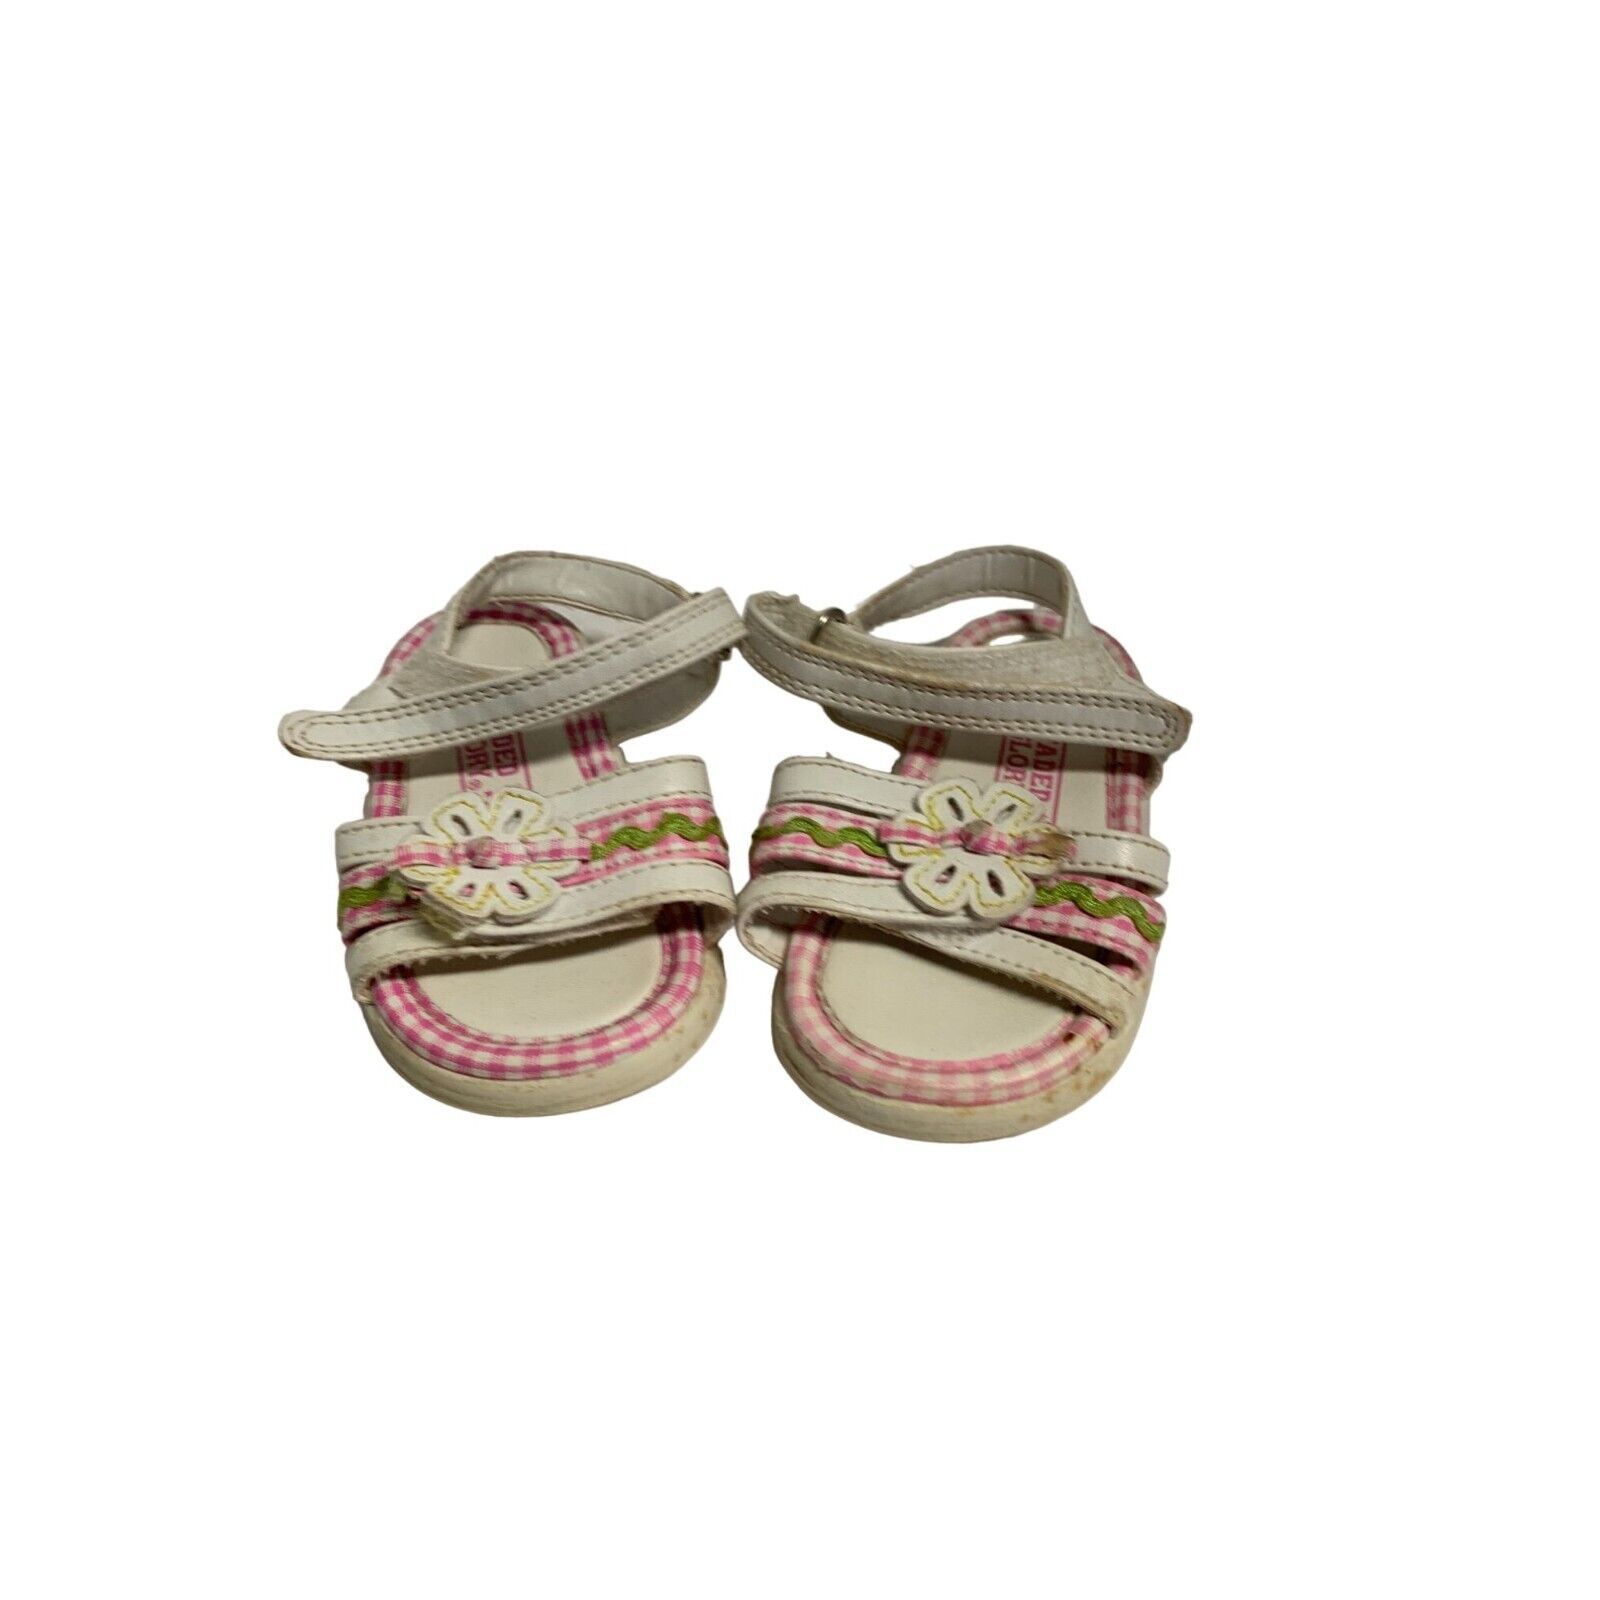 Faded Glory Baby Girls Infant Size 3 White Sandals Hook & Loop Pink Floral Gingh - $5.49